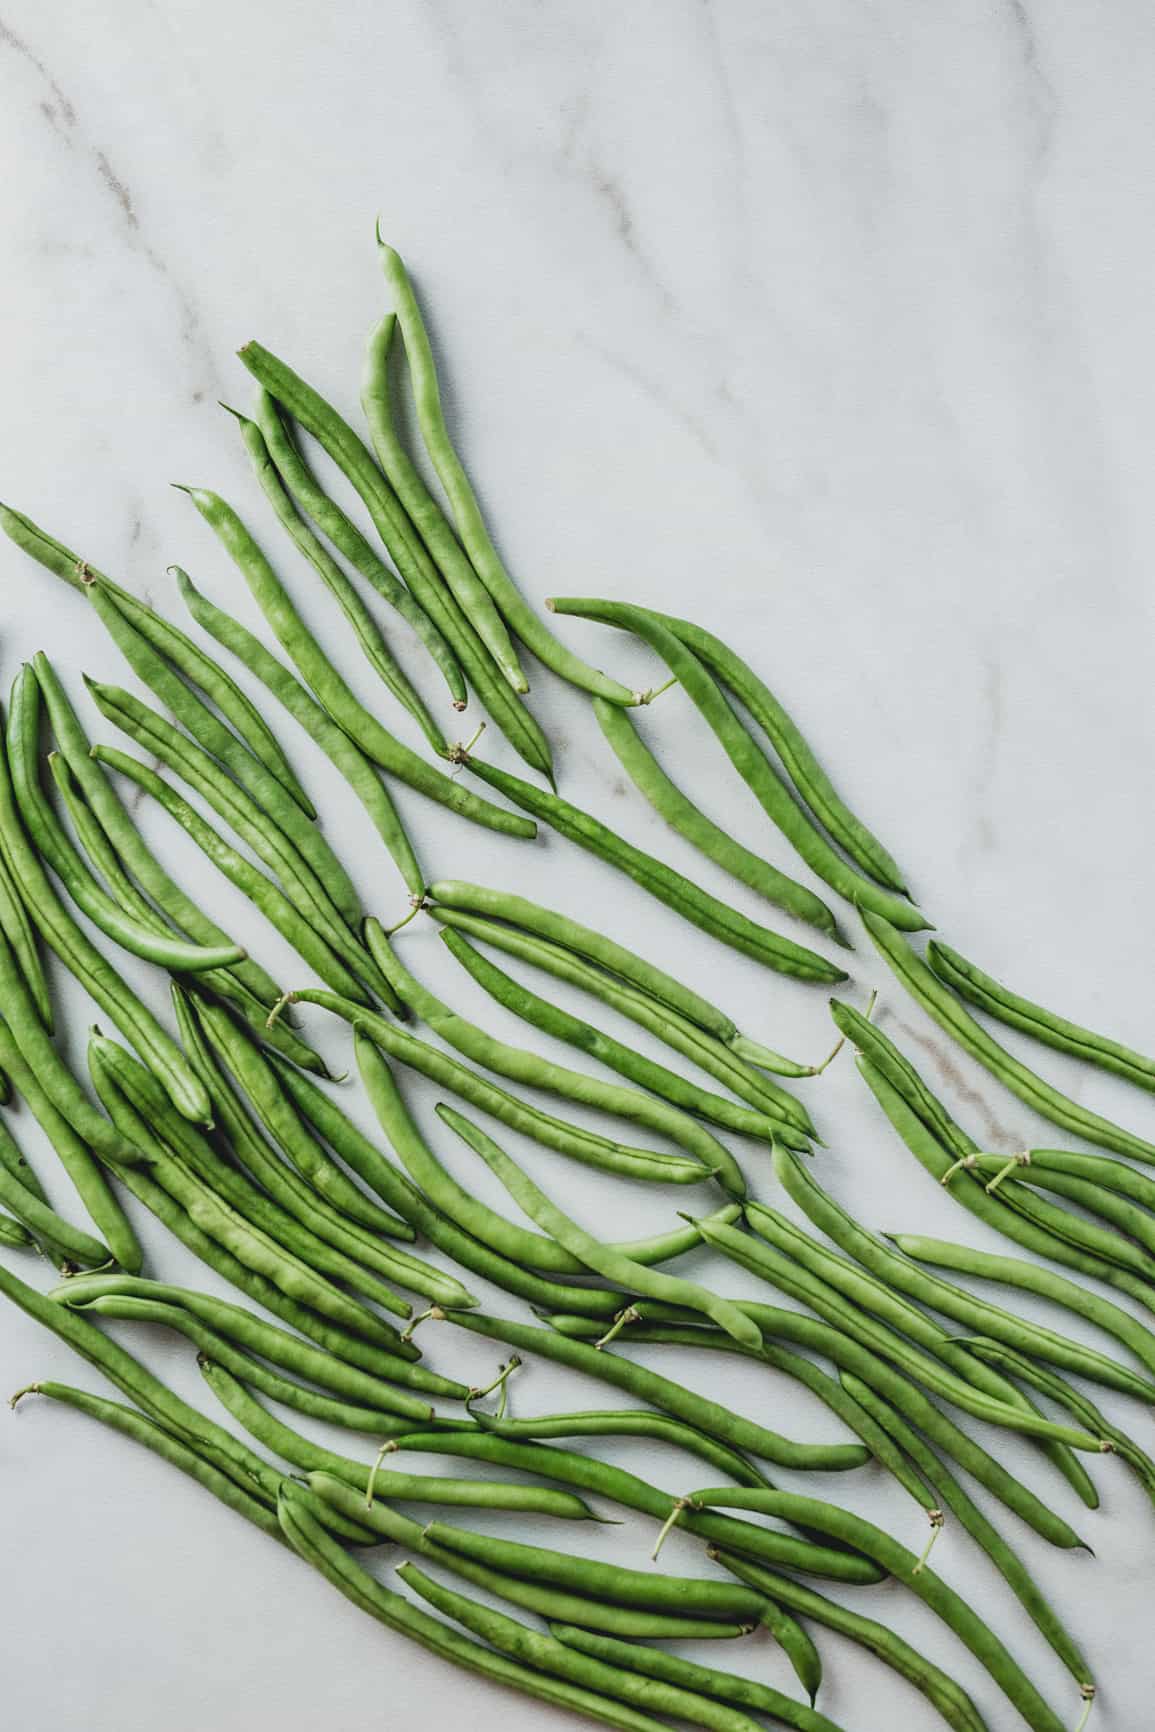 Green beans on a marble background